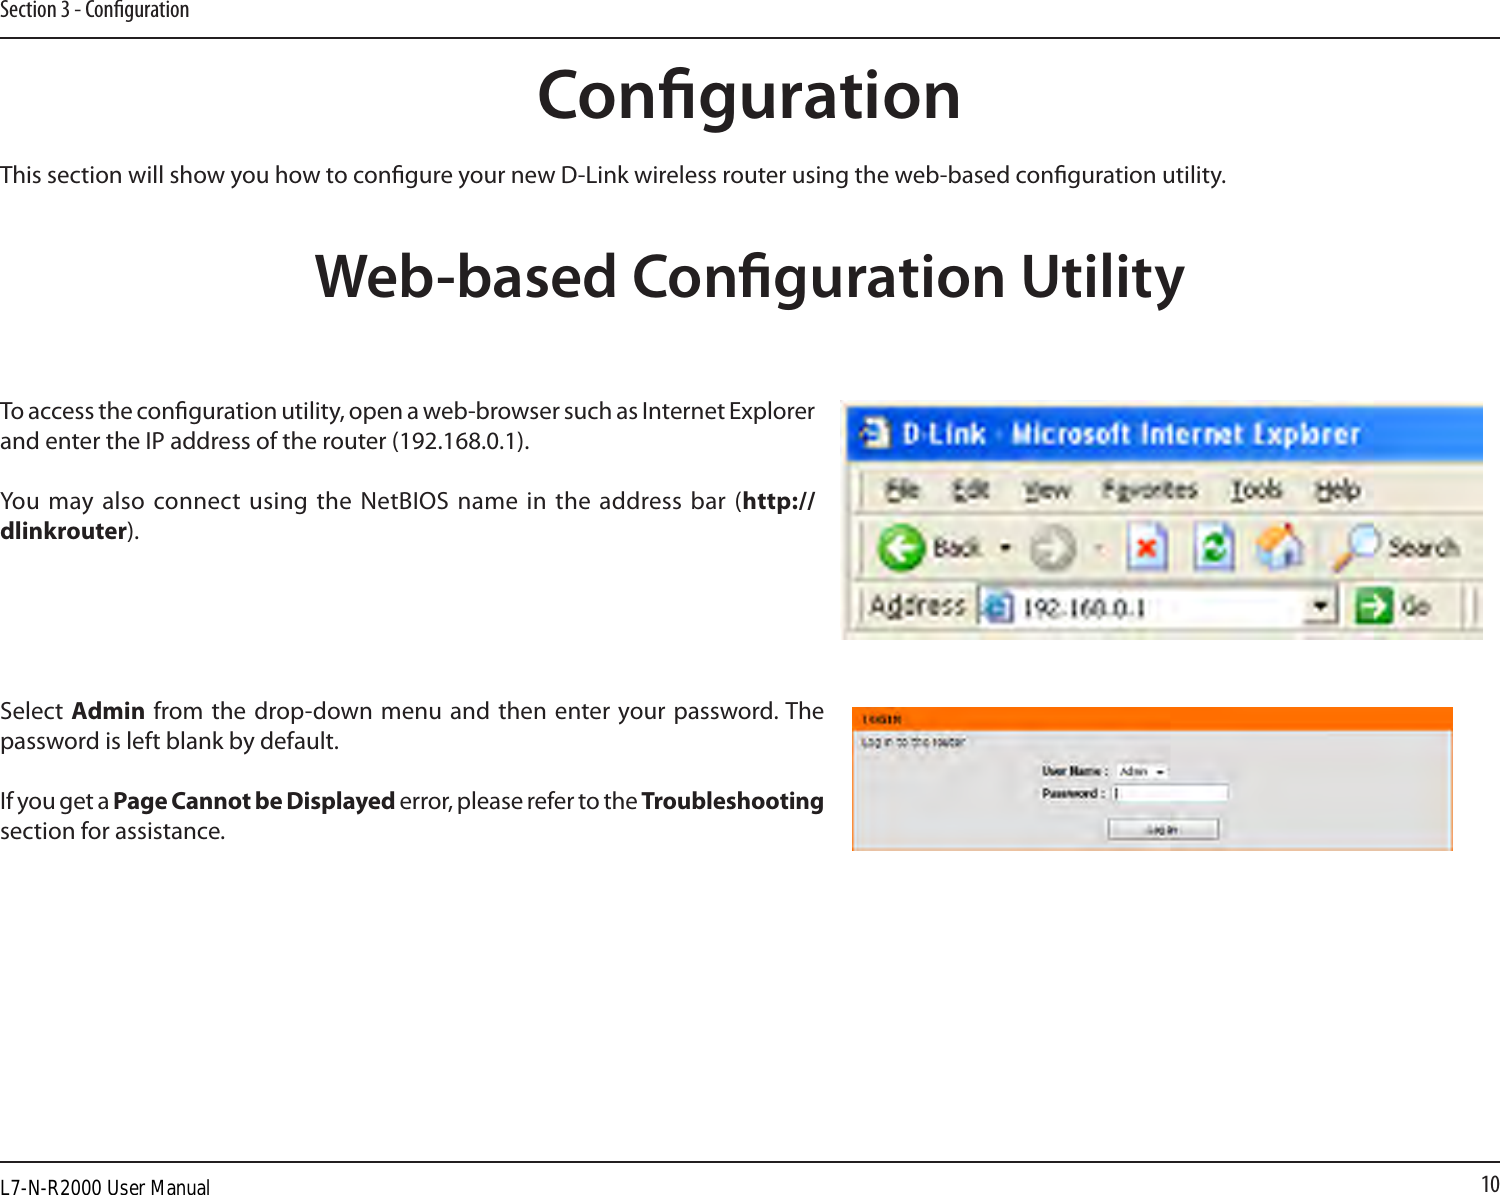 10Section 3 - CongurationCongurationThis section will show you how to congure your new D-Link wireless router using the web-based conguration utility.Web-based Conguration UtilityTo access the conguration utility, open a web-browser such as Internet Explorer and enter the IP address of the router (192.168.0.1).You  may also  connect using  the NetBIOS name in the  address bar  (http://dlinkrouter).Select Admin from the  drop-down menu  and then enter  your password. The password is left blank by default.If you get a Page Cannot be Displayed error, please refer to the Troubleshooting section for assistance.L7-N-R2000 User Manual